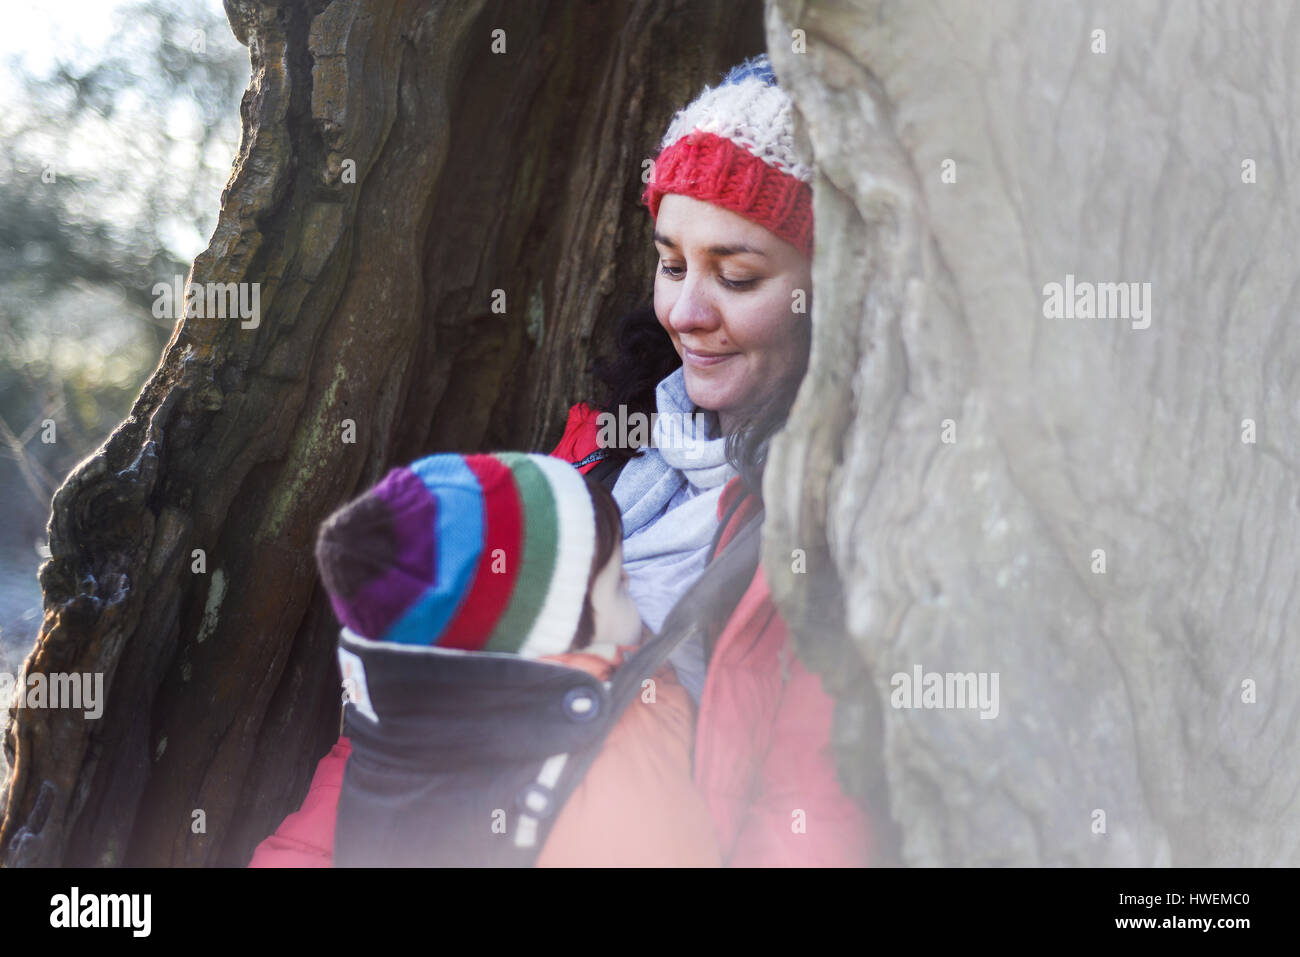 Woman in hollow tree, carrying young baby in sling Stock Photo